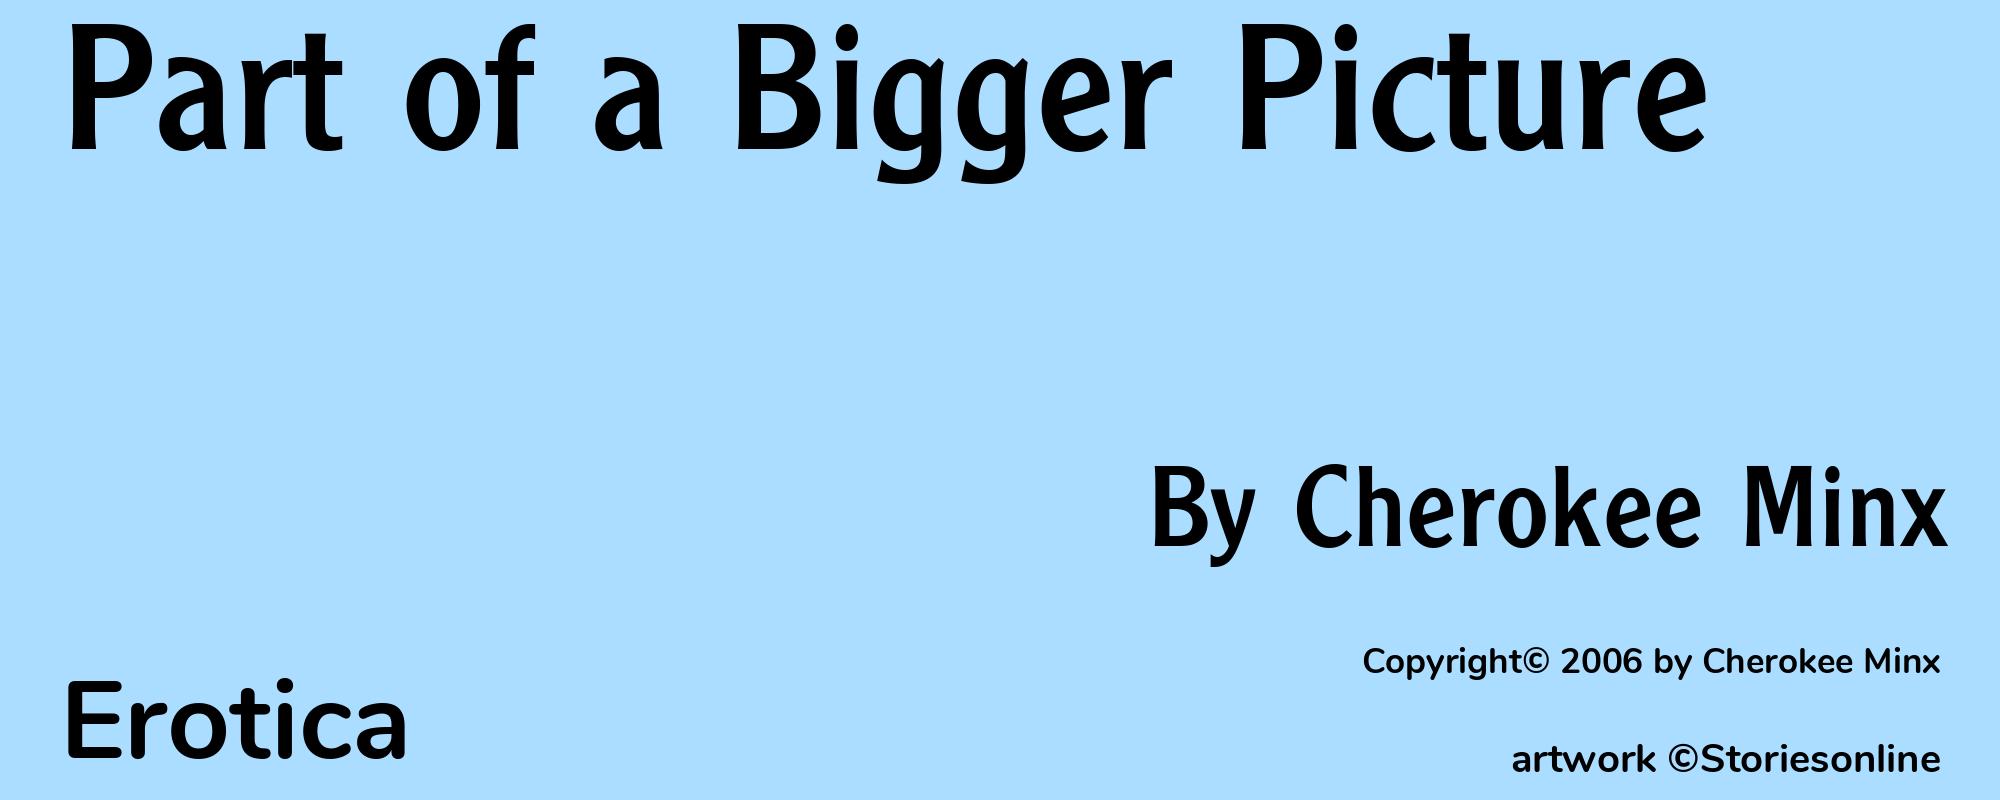 Part of a Bigger Picture - Cover